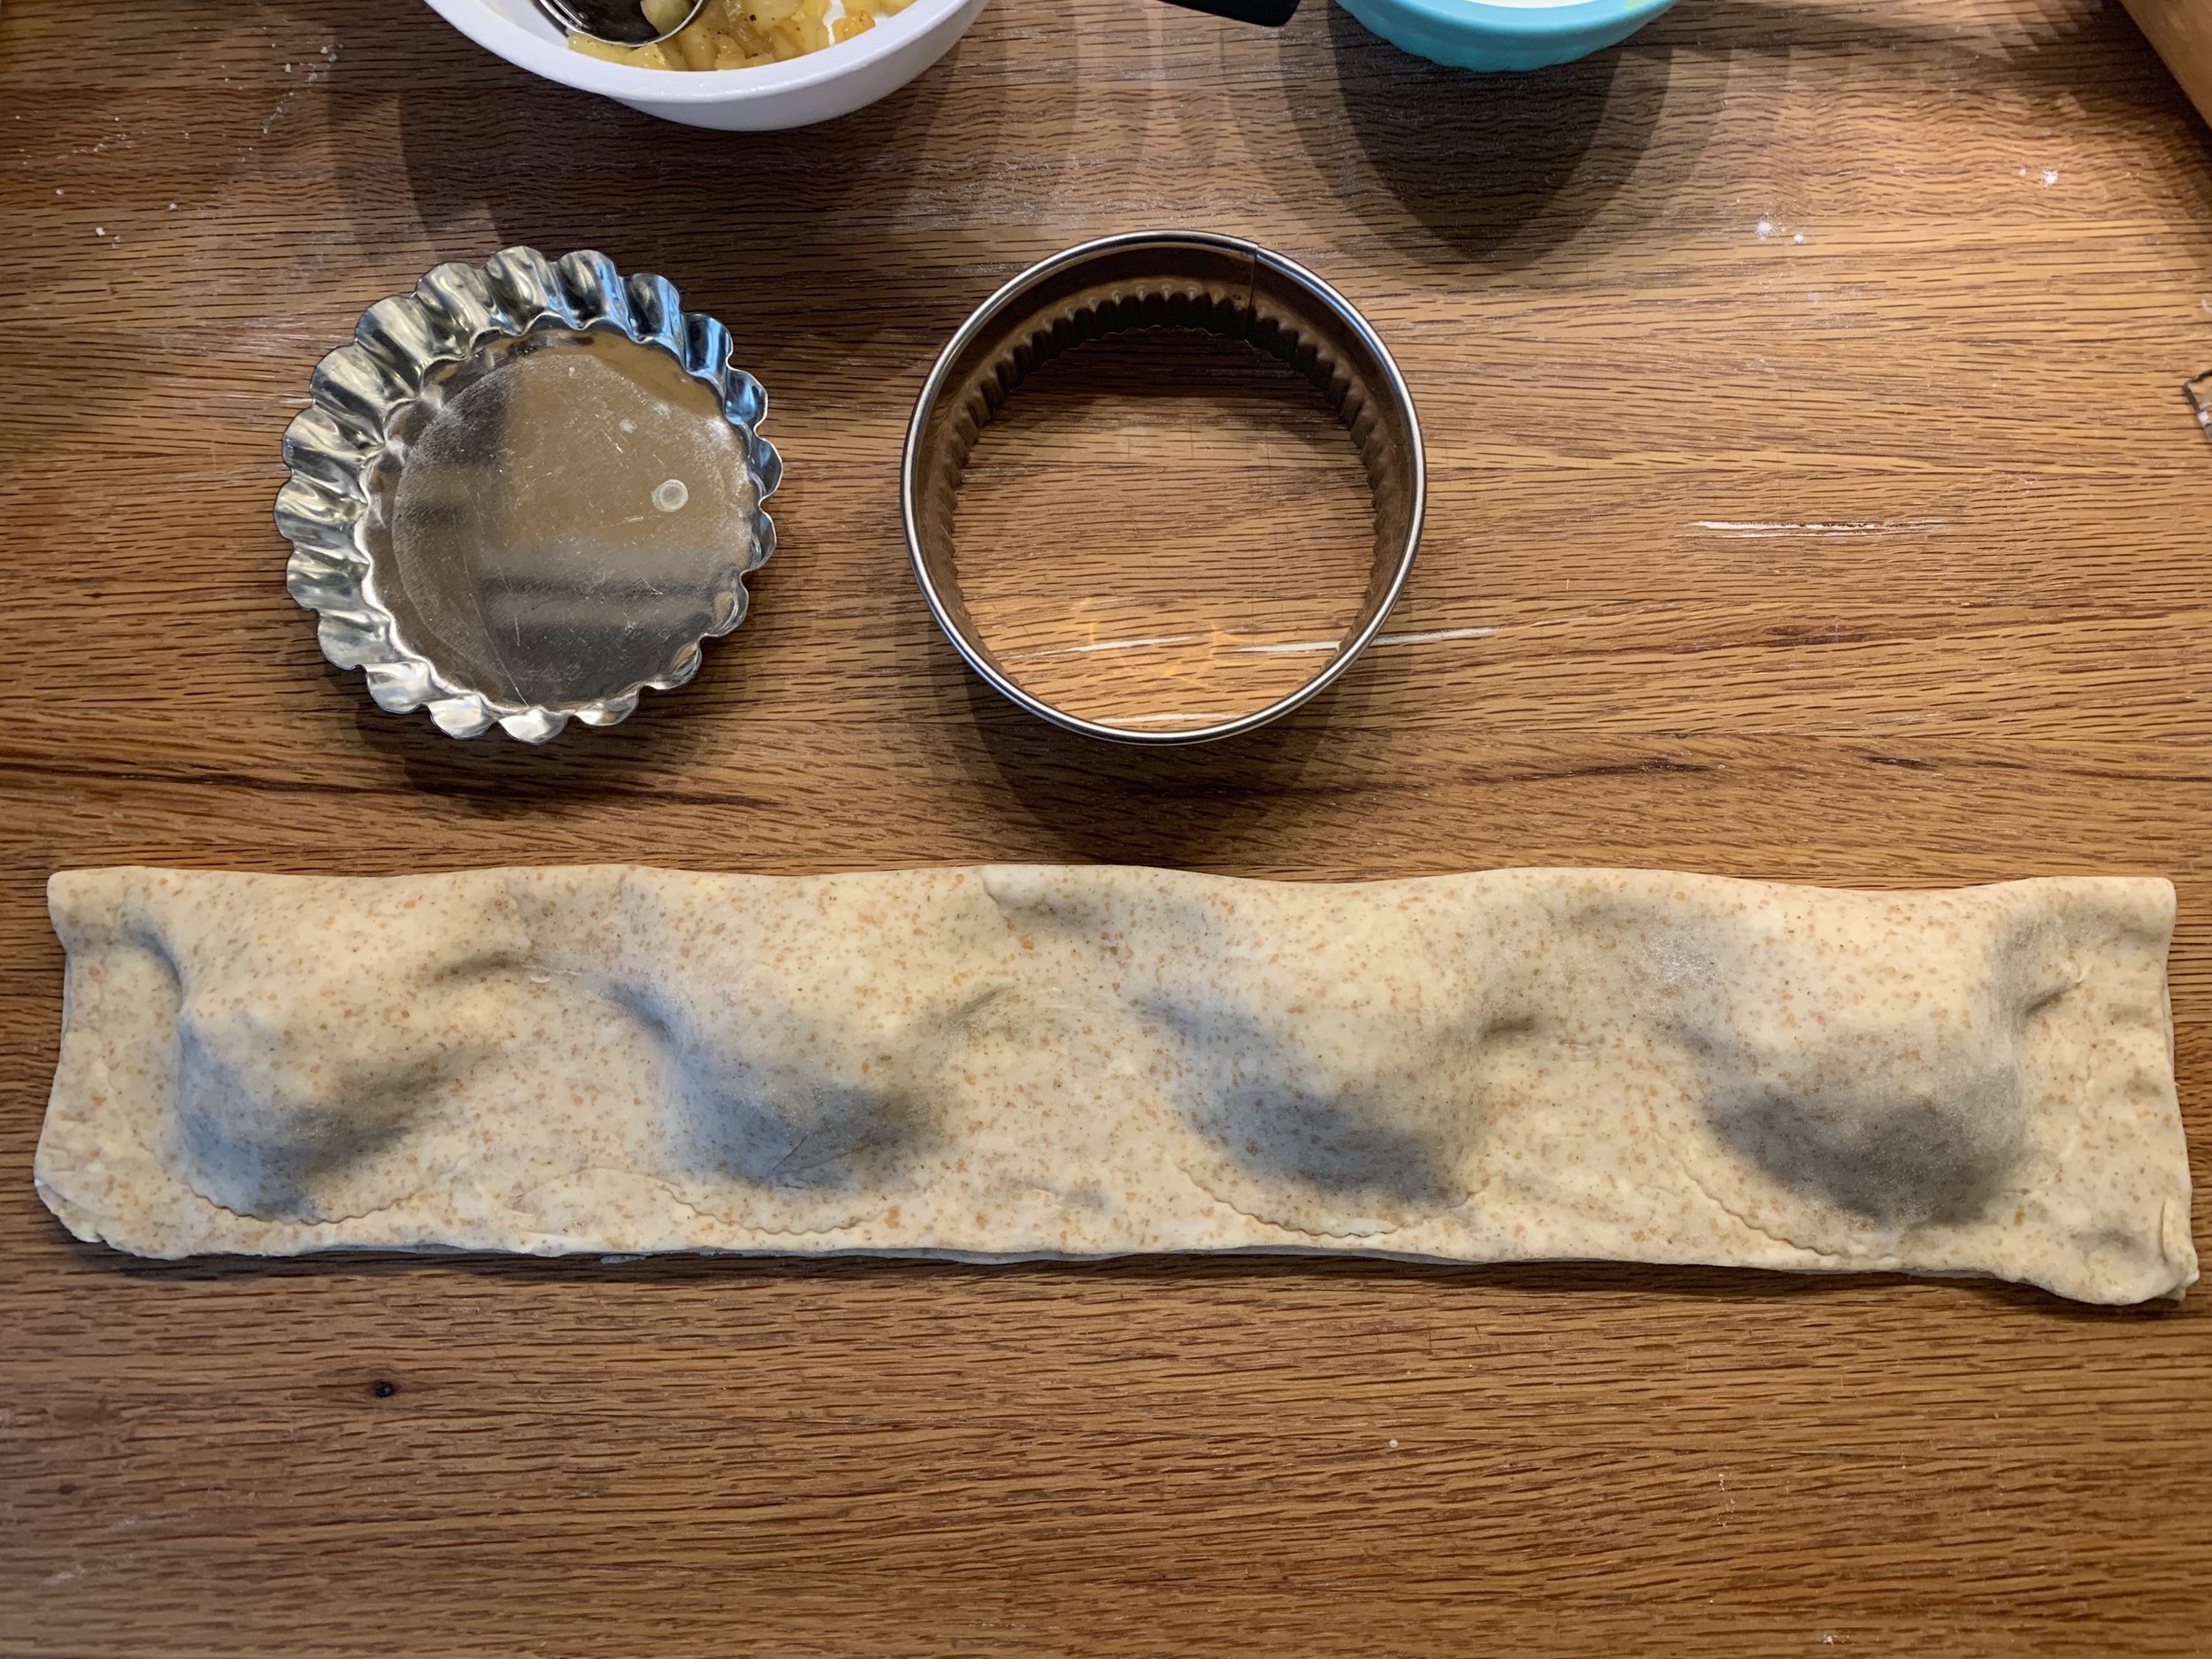 This Genius Method For Fixing An Uneven Aluminum Foil Roll